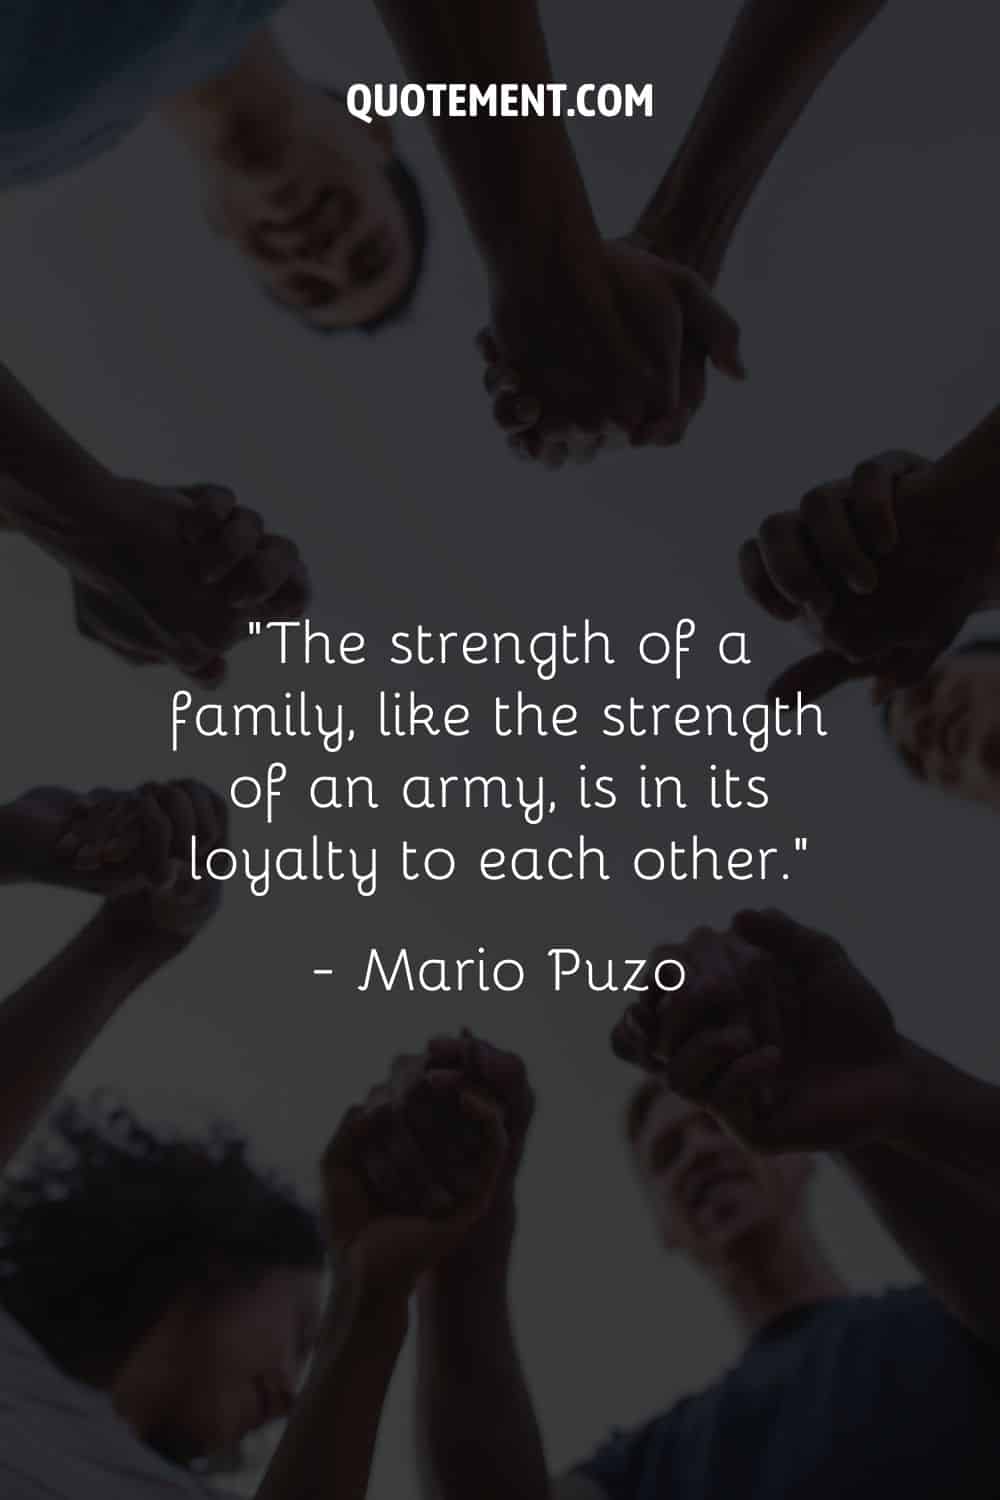 “The strength of a family, like the strength of an army, is in its loyalty to each other.” — Mario Puzo